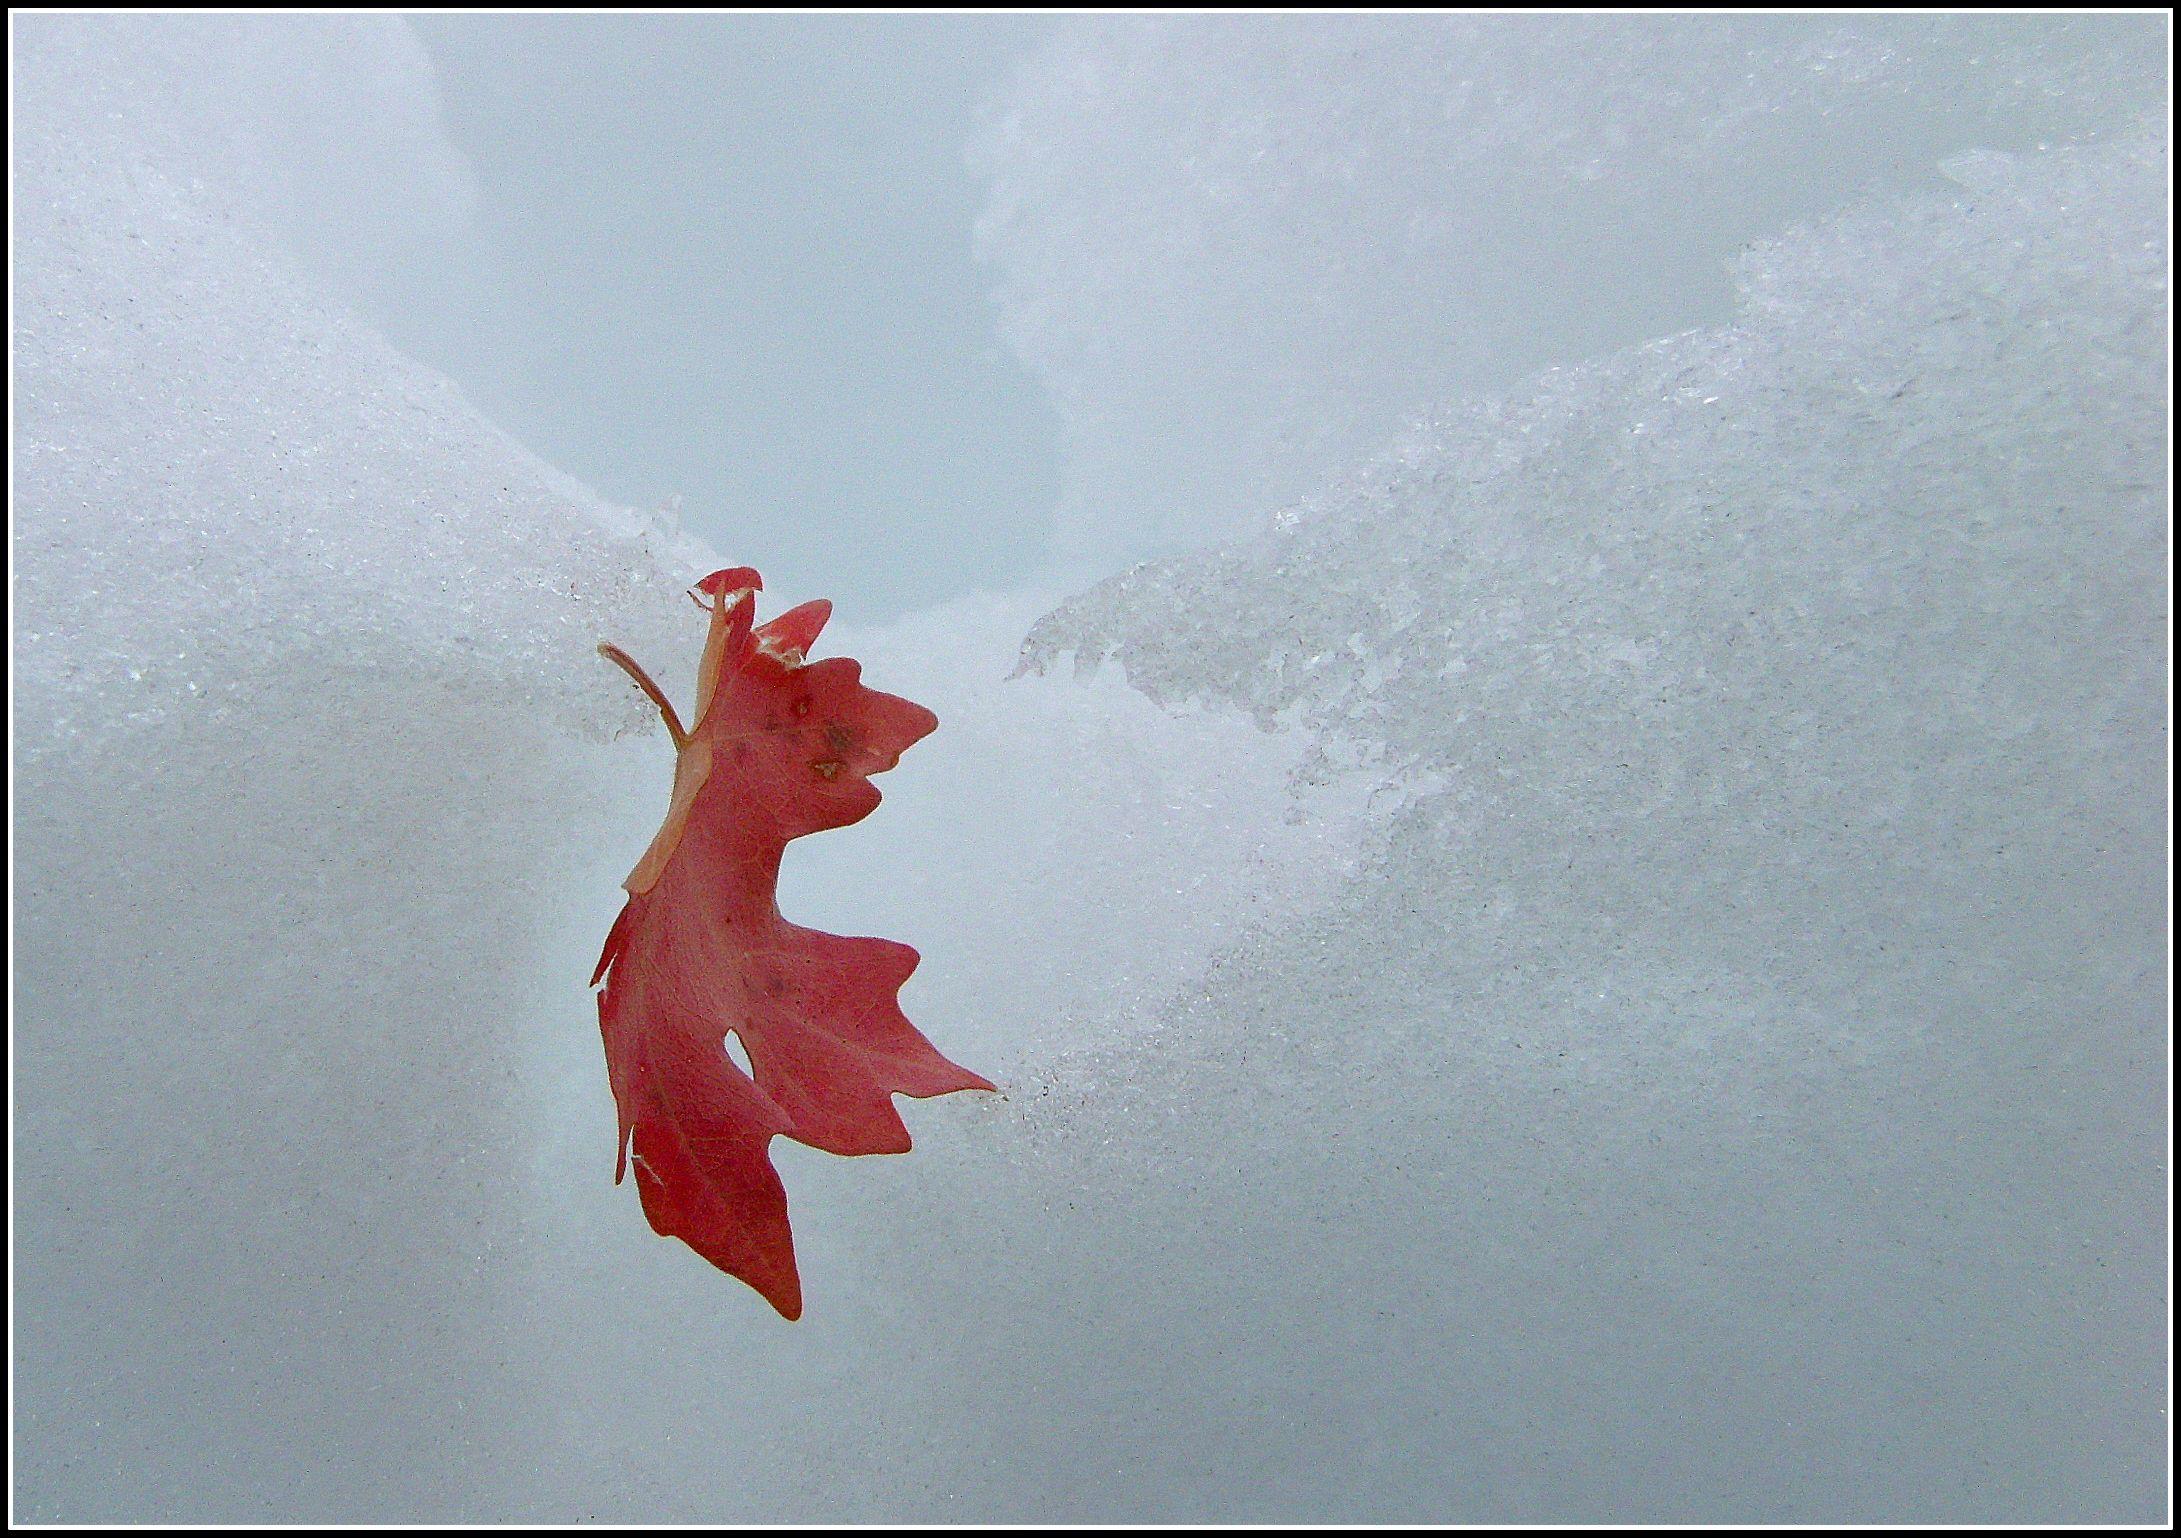 Red Maple Leaf of a Word Logo - Maple leaf in snow | Scott's Place...Images and Words